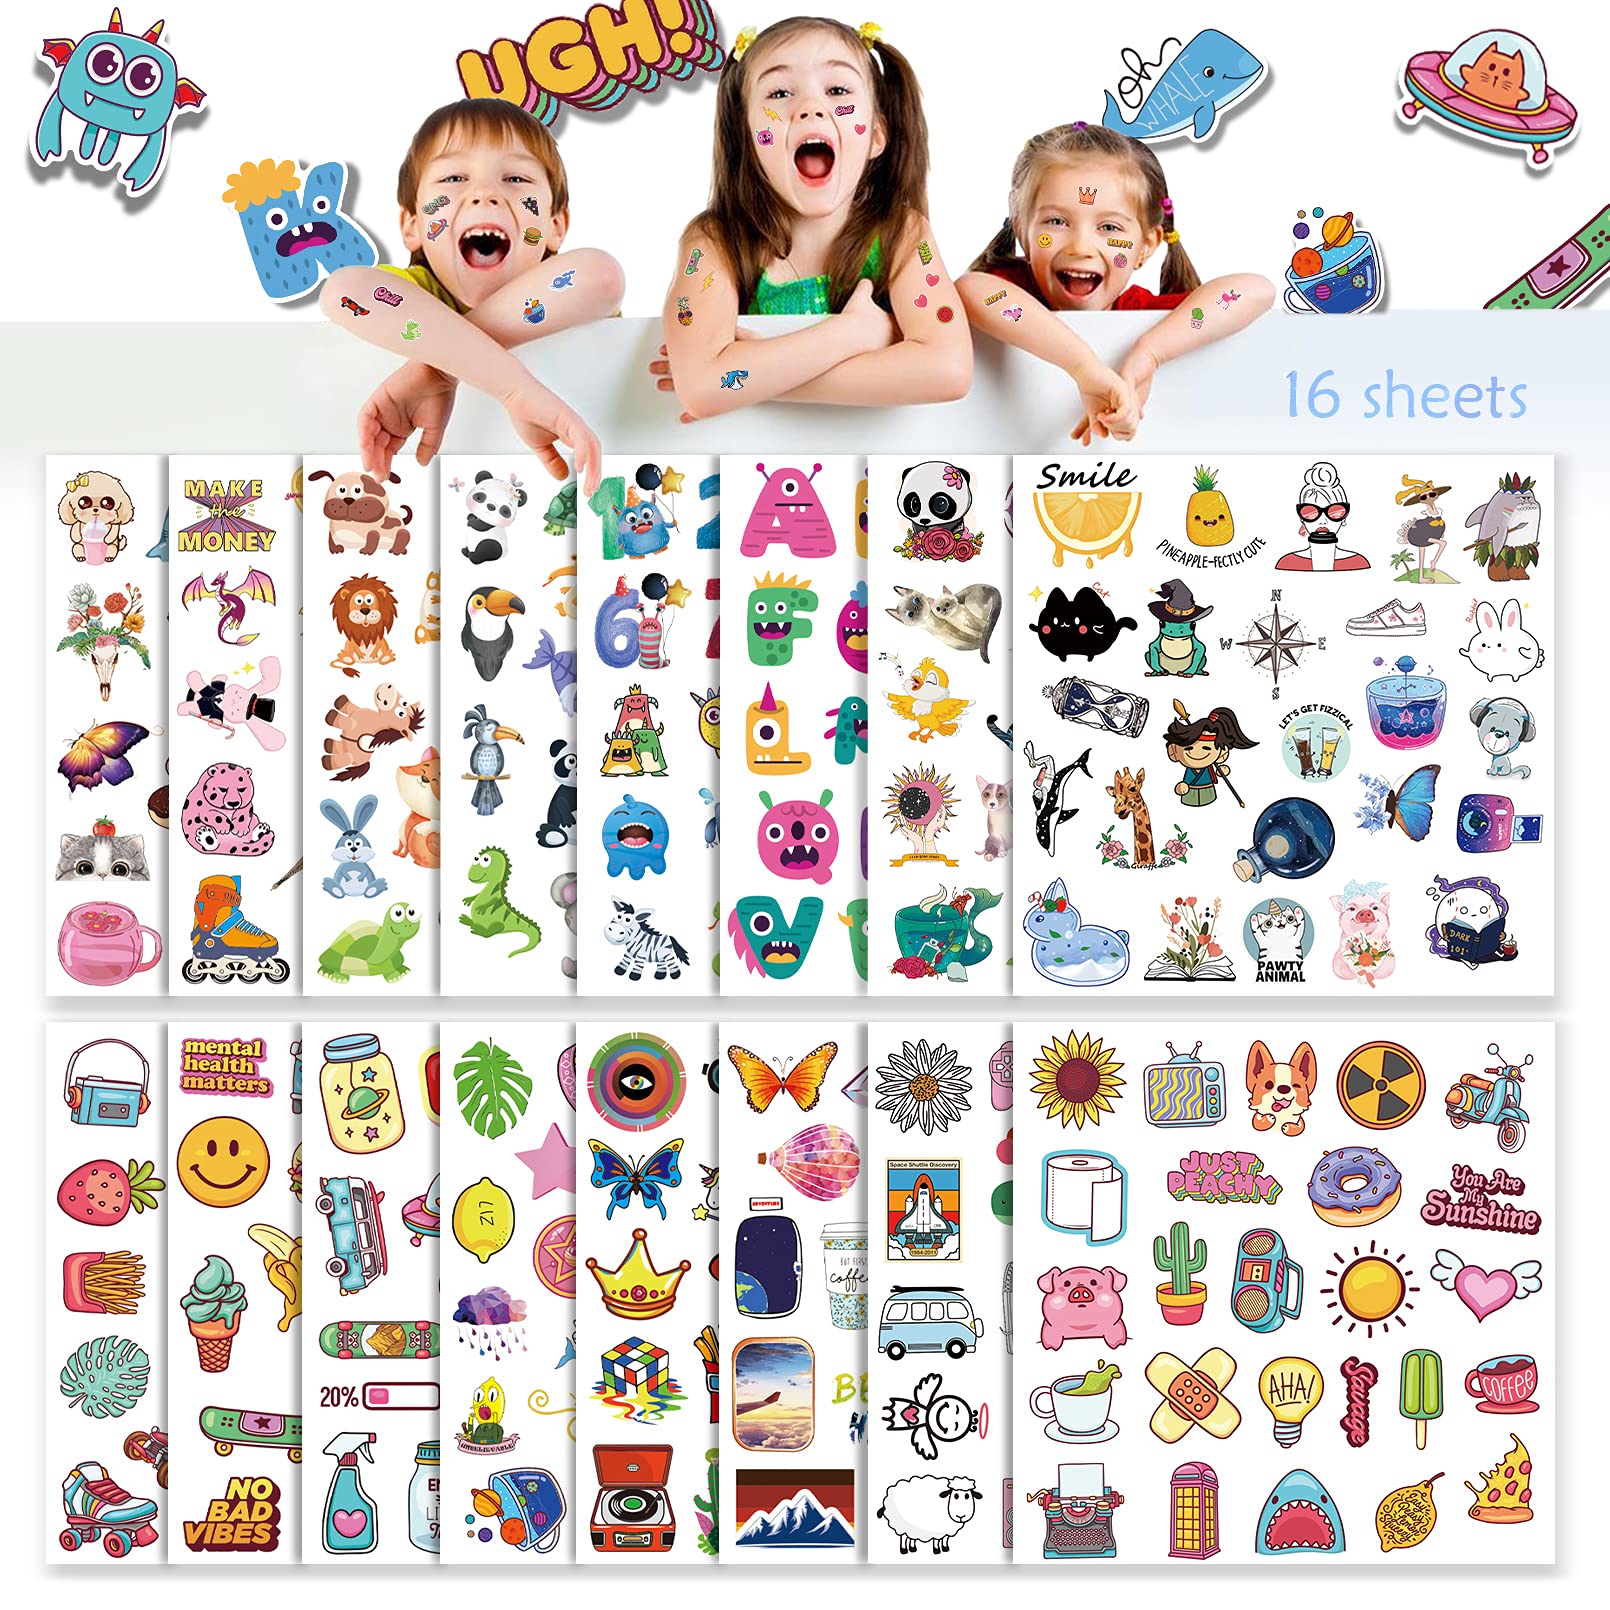 Aresvns Temporary Tattoos for Kids 16 sheets 400+pcs Mixed Style Cartoon Animal Fake Tattoo Skin Stickers for Children's Birthday Boys Girls Party Favors Gift